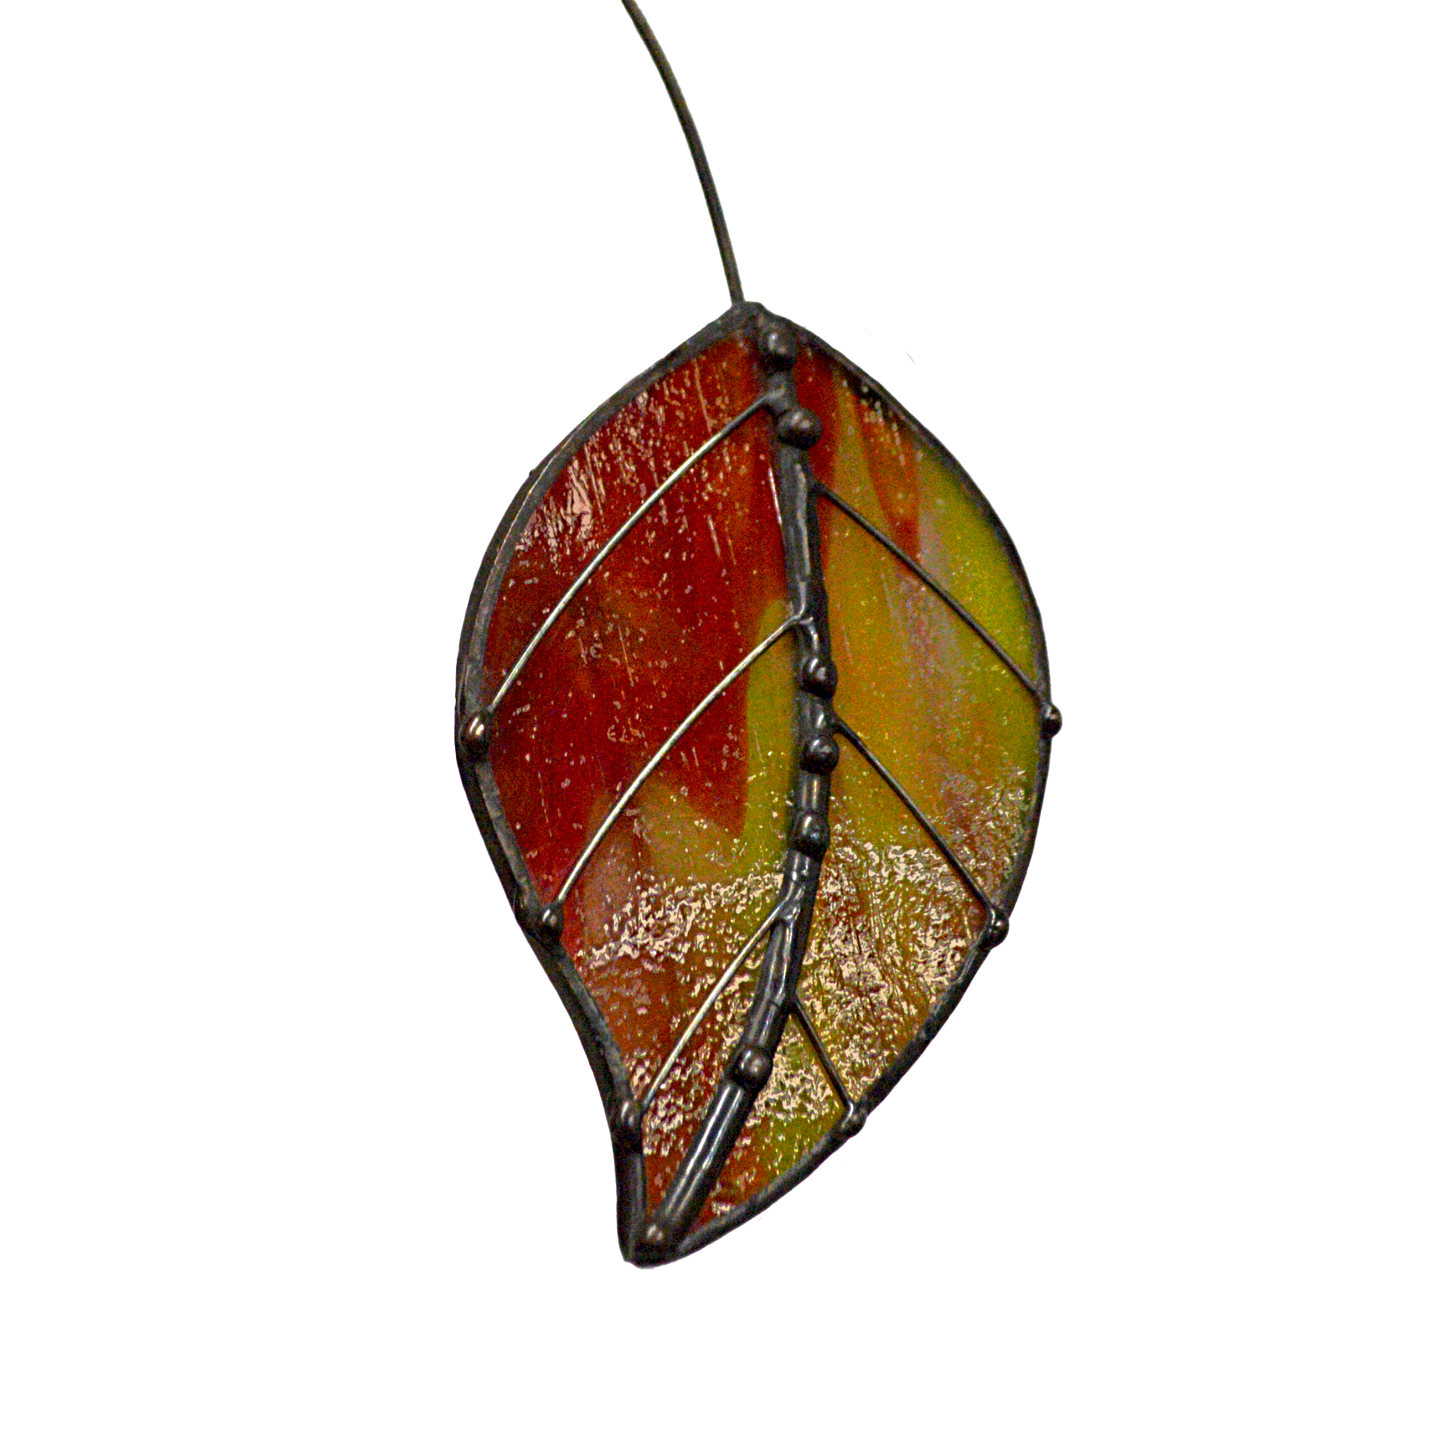 This decorative leaf shaped stained glass suncatcher is a great for window decoration, as a gift and more! Hang it up in your window to see the full beauty of the stained glass, add it to a floral arraignment, or use it as a gift for the nature lover in your life.   All stained glass is handmade by Deb's Broken glass in Bathurst NB.  